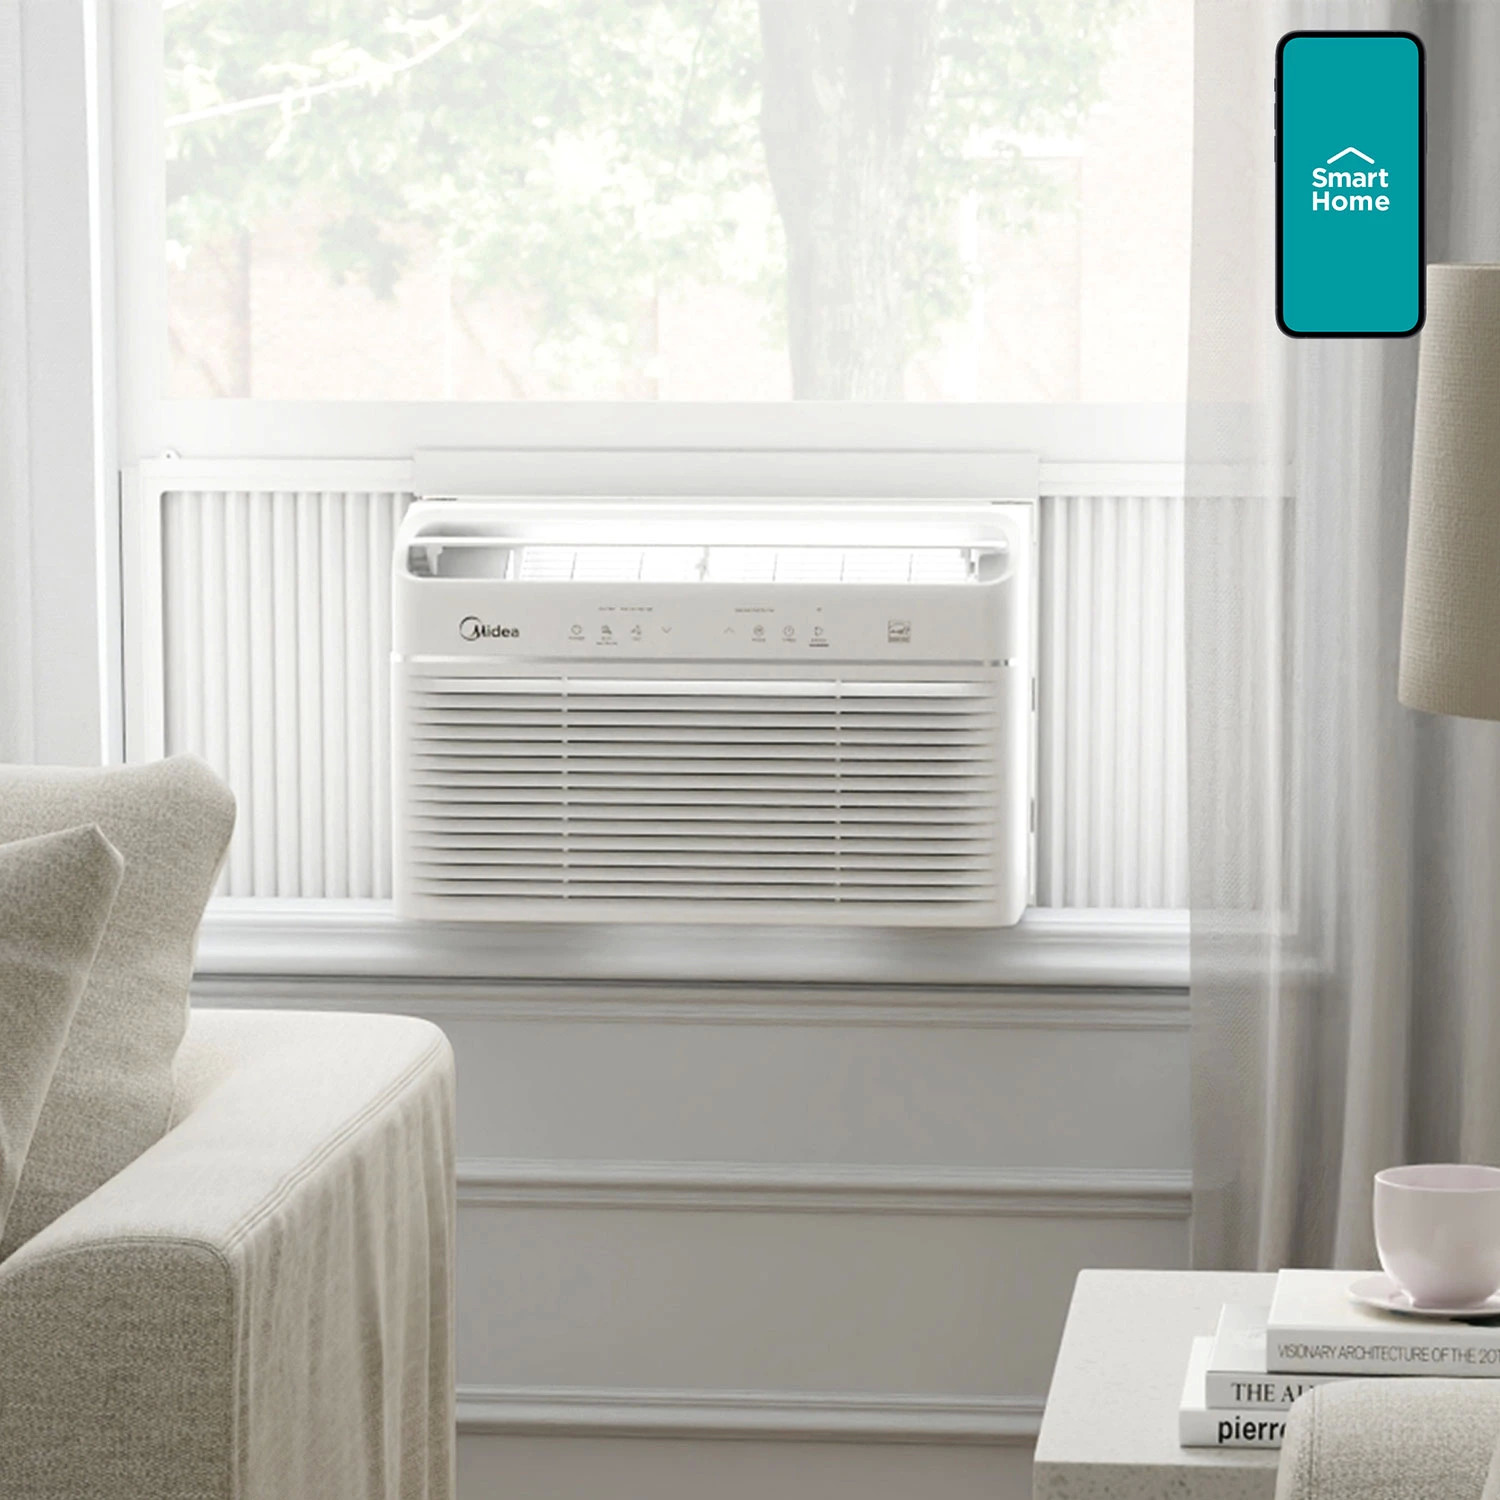 Midea 12,000 BTU Smart Inverter Window AC, Cools up to 550 Sq. Ft., Ultra Quiet with High-Efficiency Inverter Technology, Energy Star Certified - $300 at Sam's Club